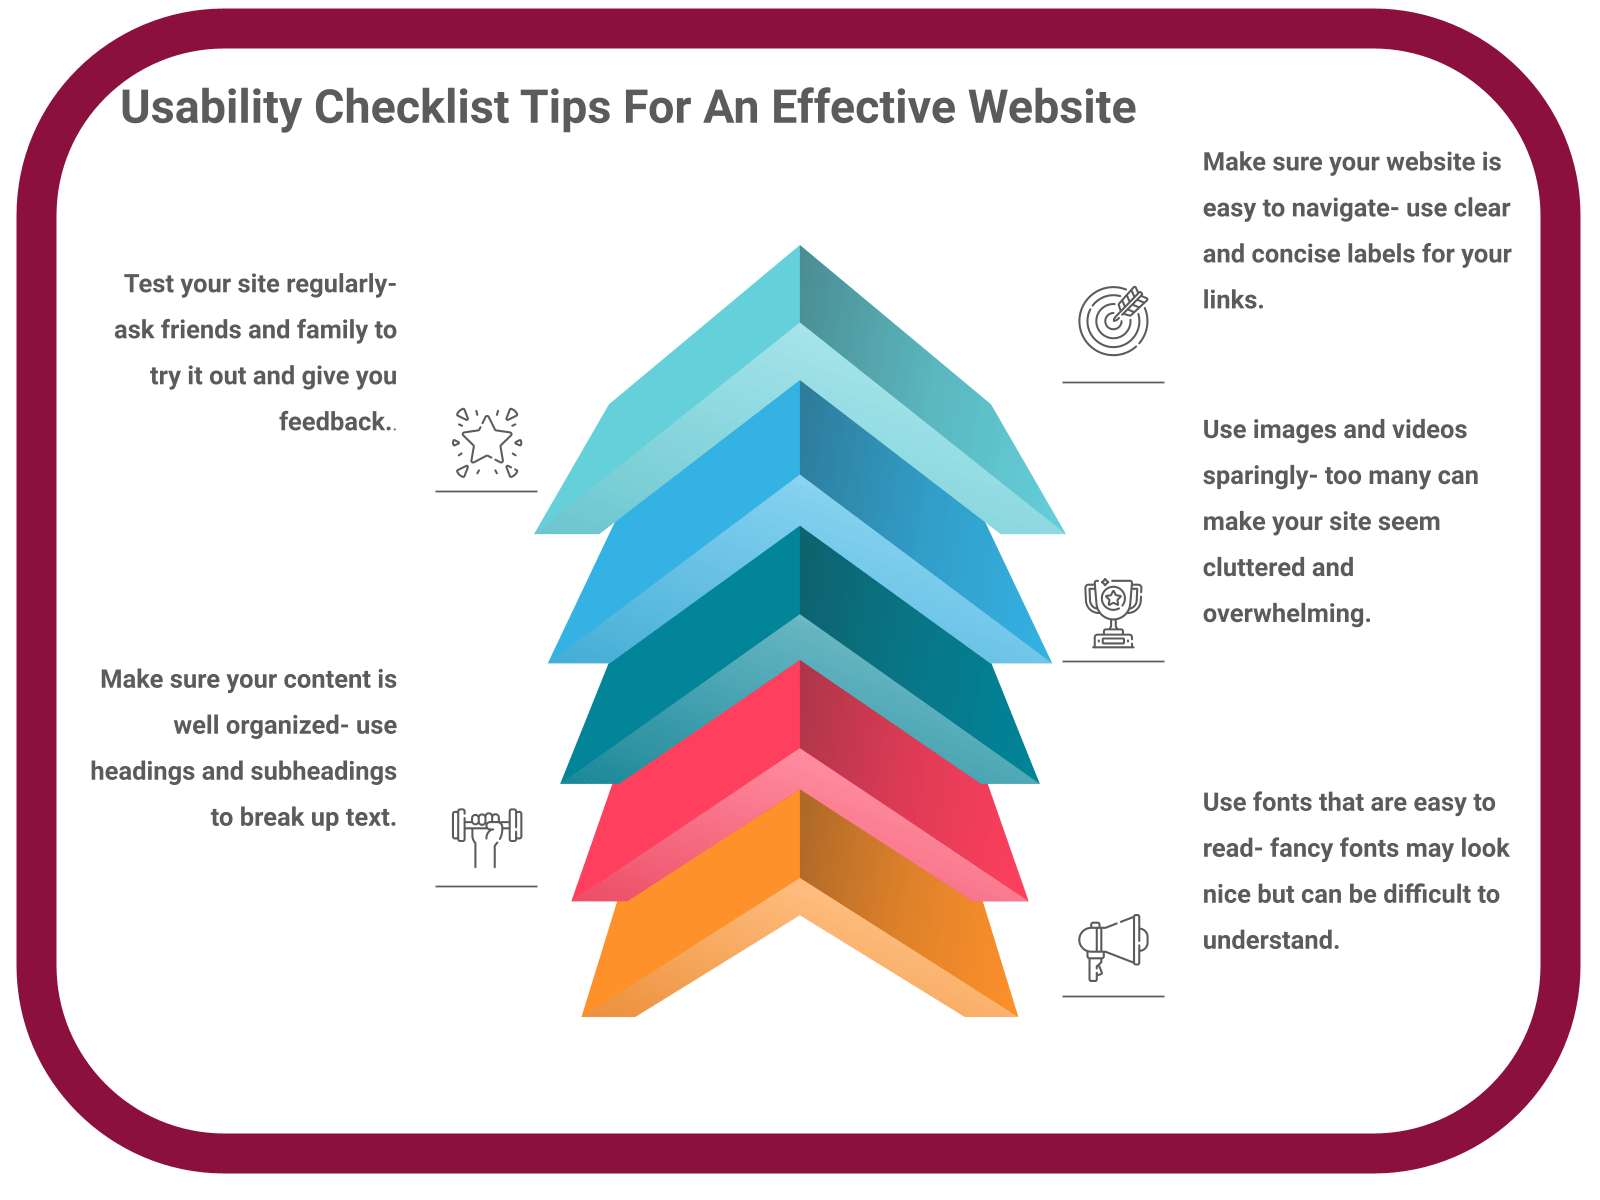 INFOGRAPHIC: Usability Checklist Tips For An Effective Website - Poll the People